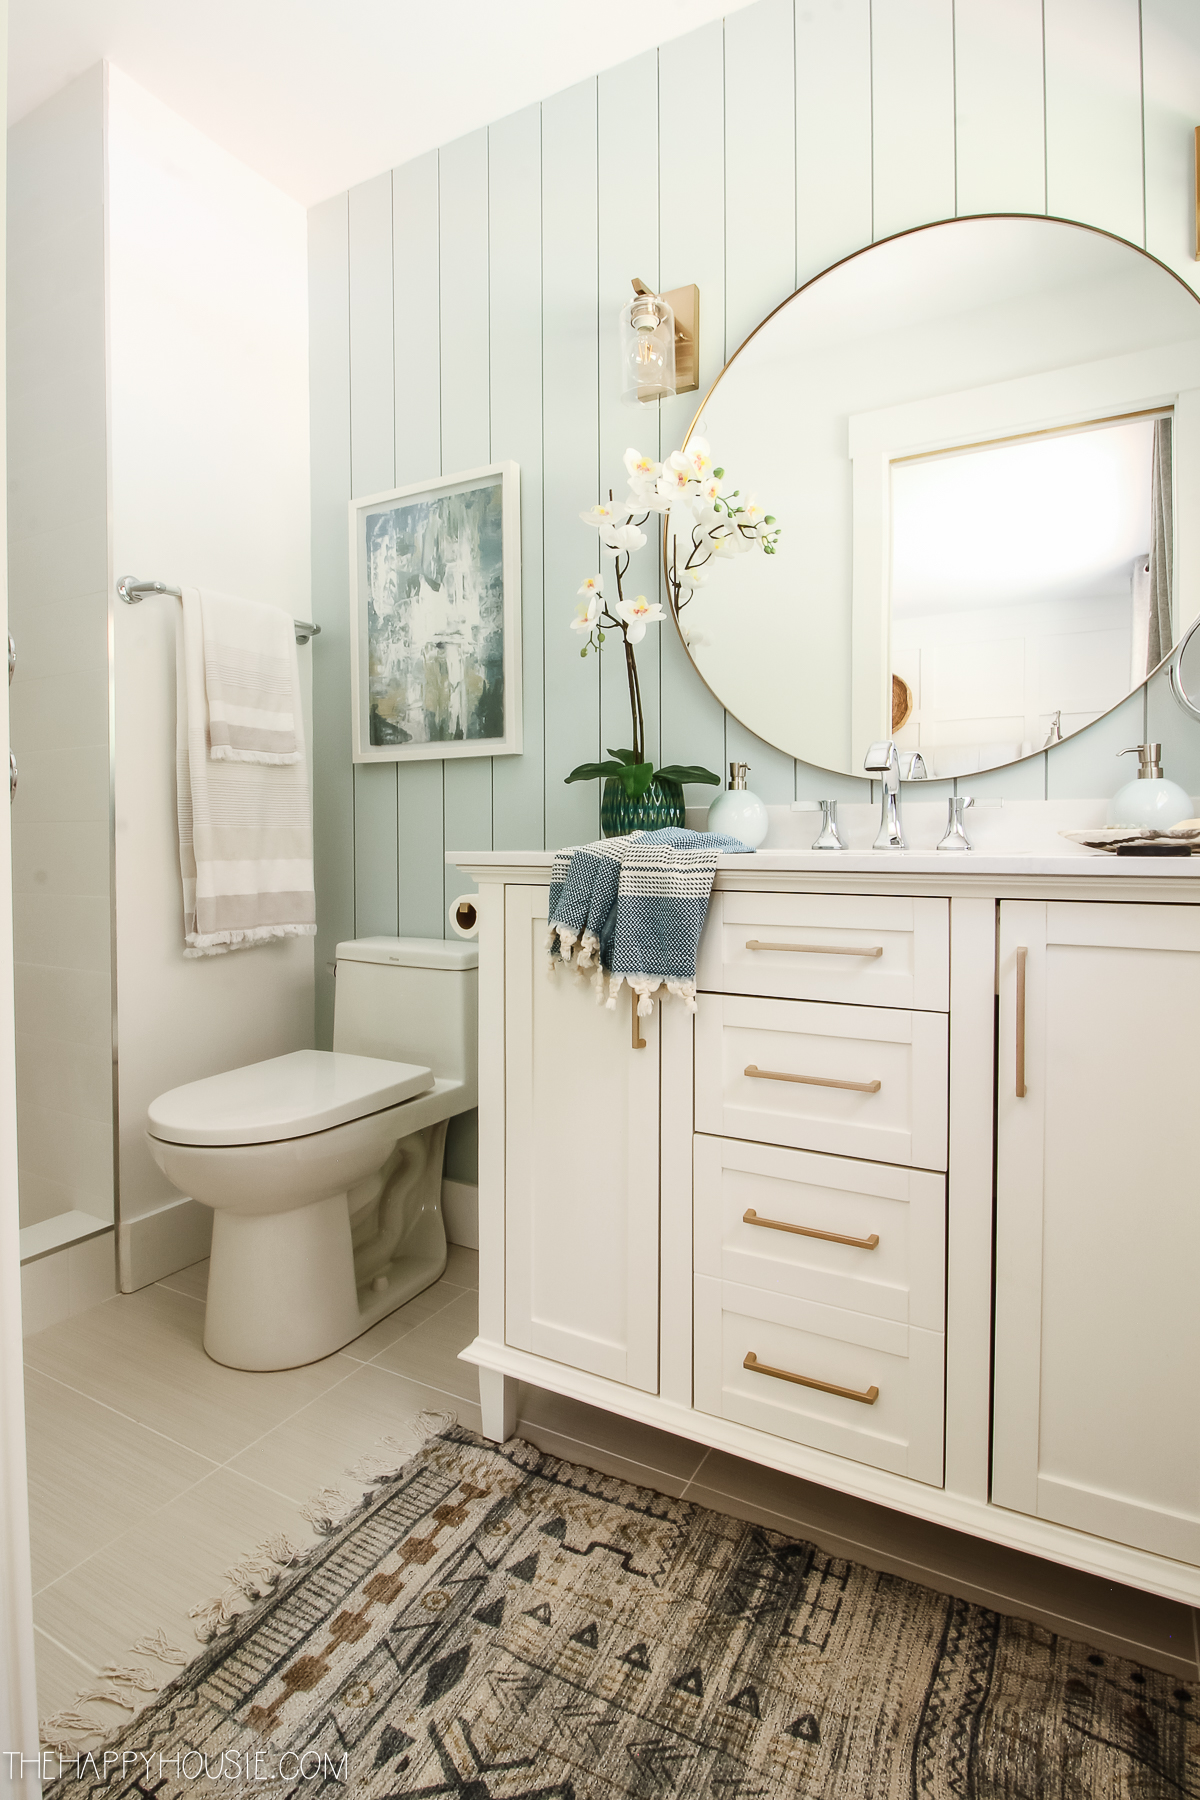 White cabinets and a round mirror in this coastal bathroom.